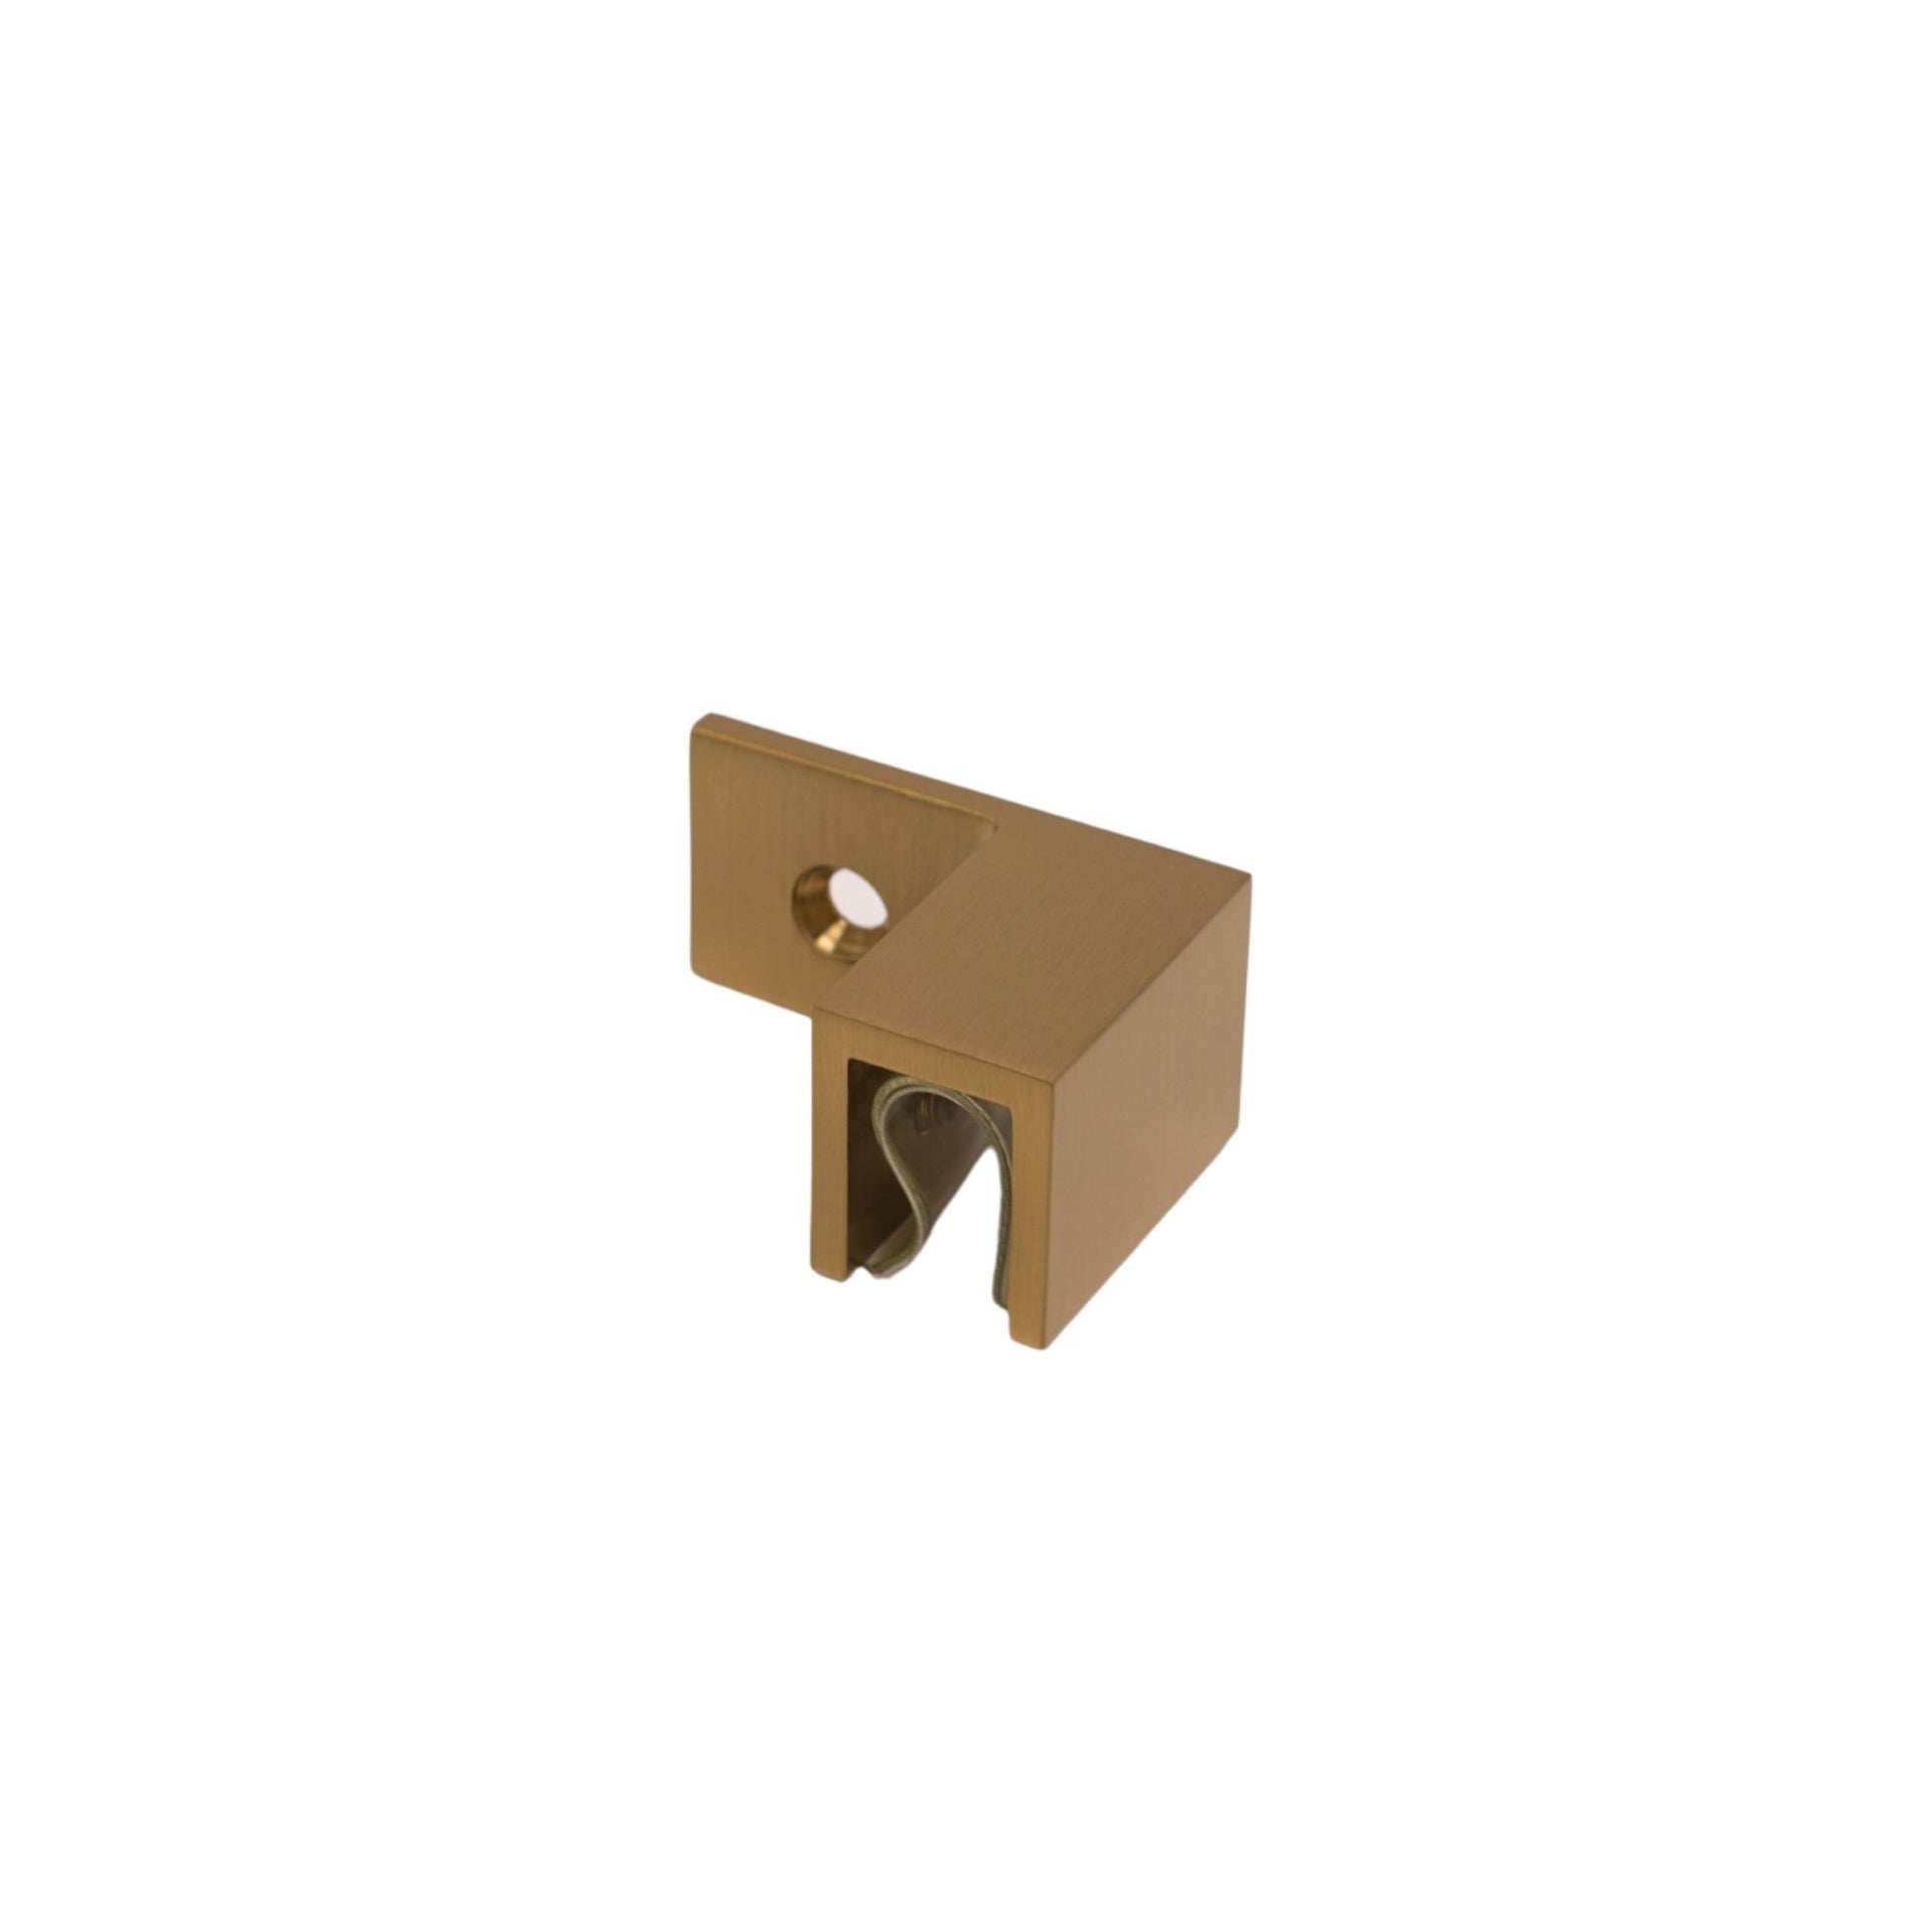 Satin Gold Sleeve Over Wall Mount Glass Clamp (Right)